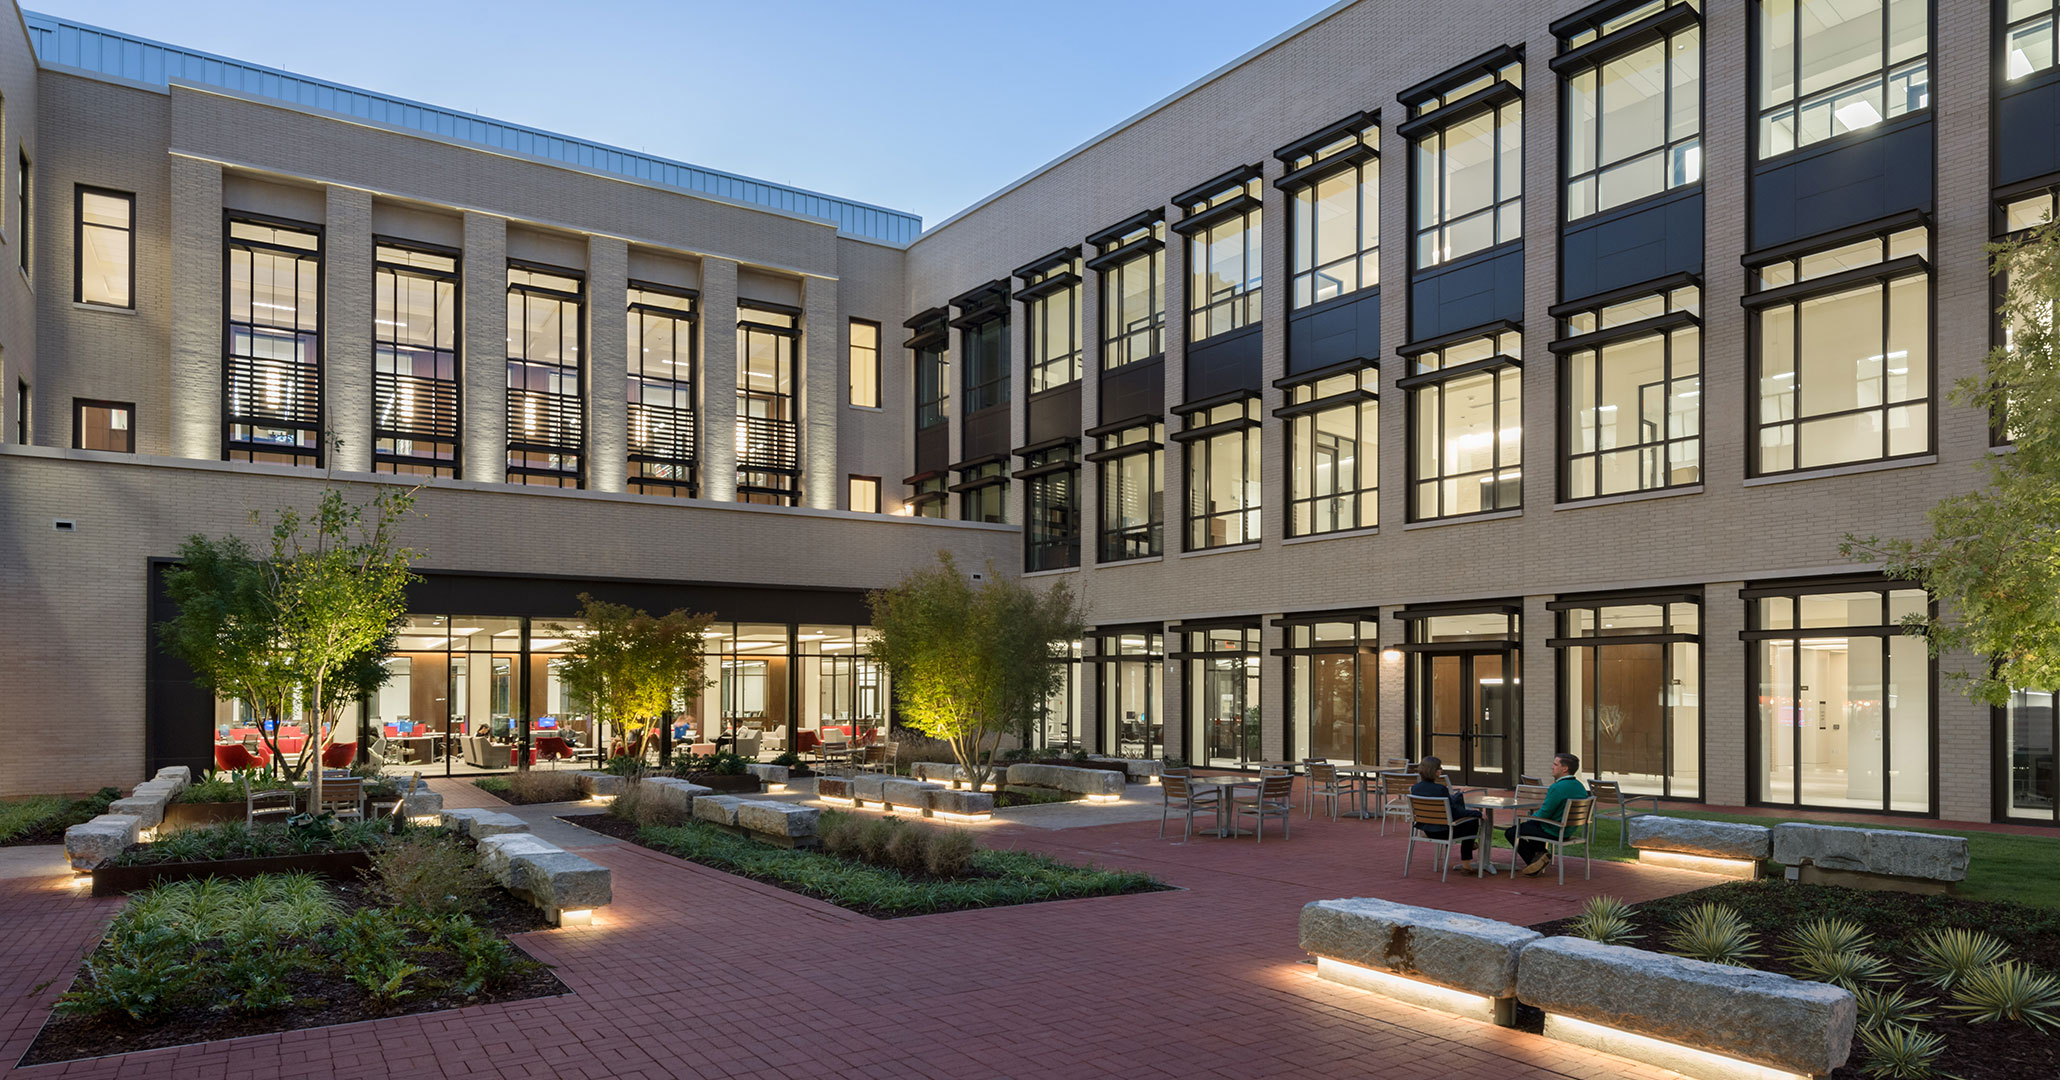 University of South Carolina worked with Boudreaux architects to design the new Law School building.